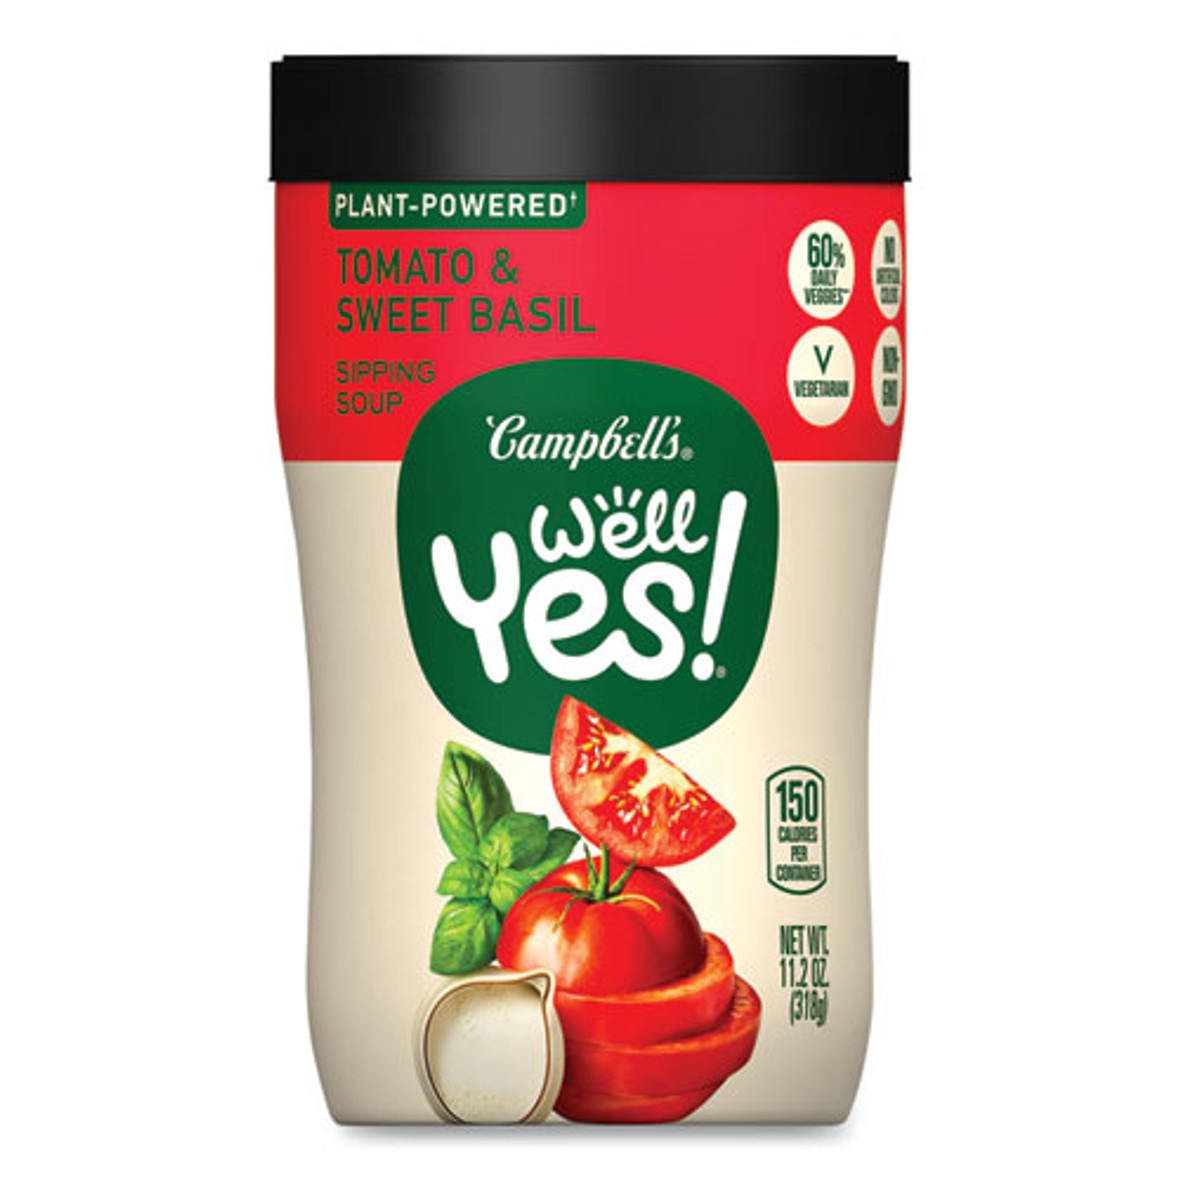 Campbell's Well Yes Tomato And Sweet Basil Sipping Soup, 11.2 Oz Cup, 8/carton